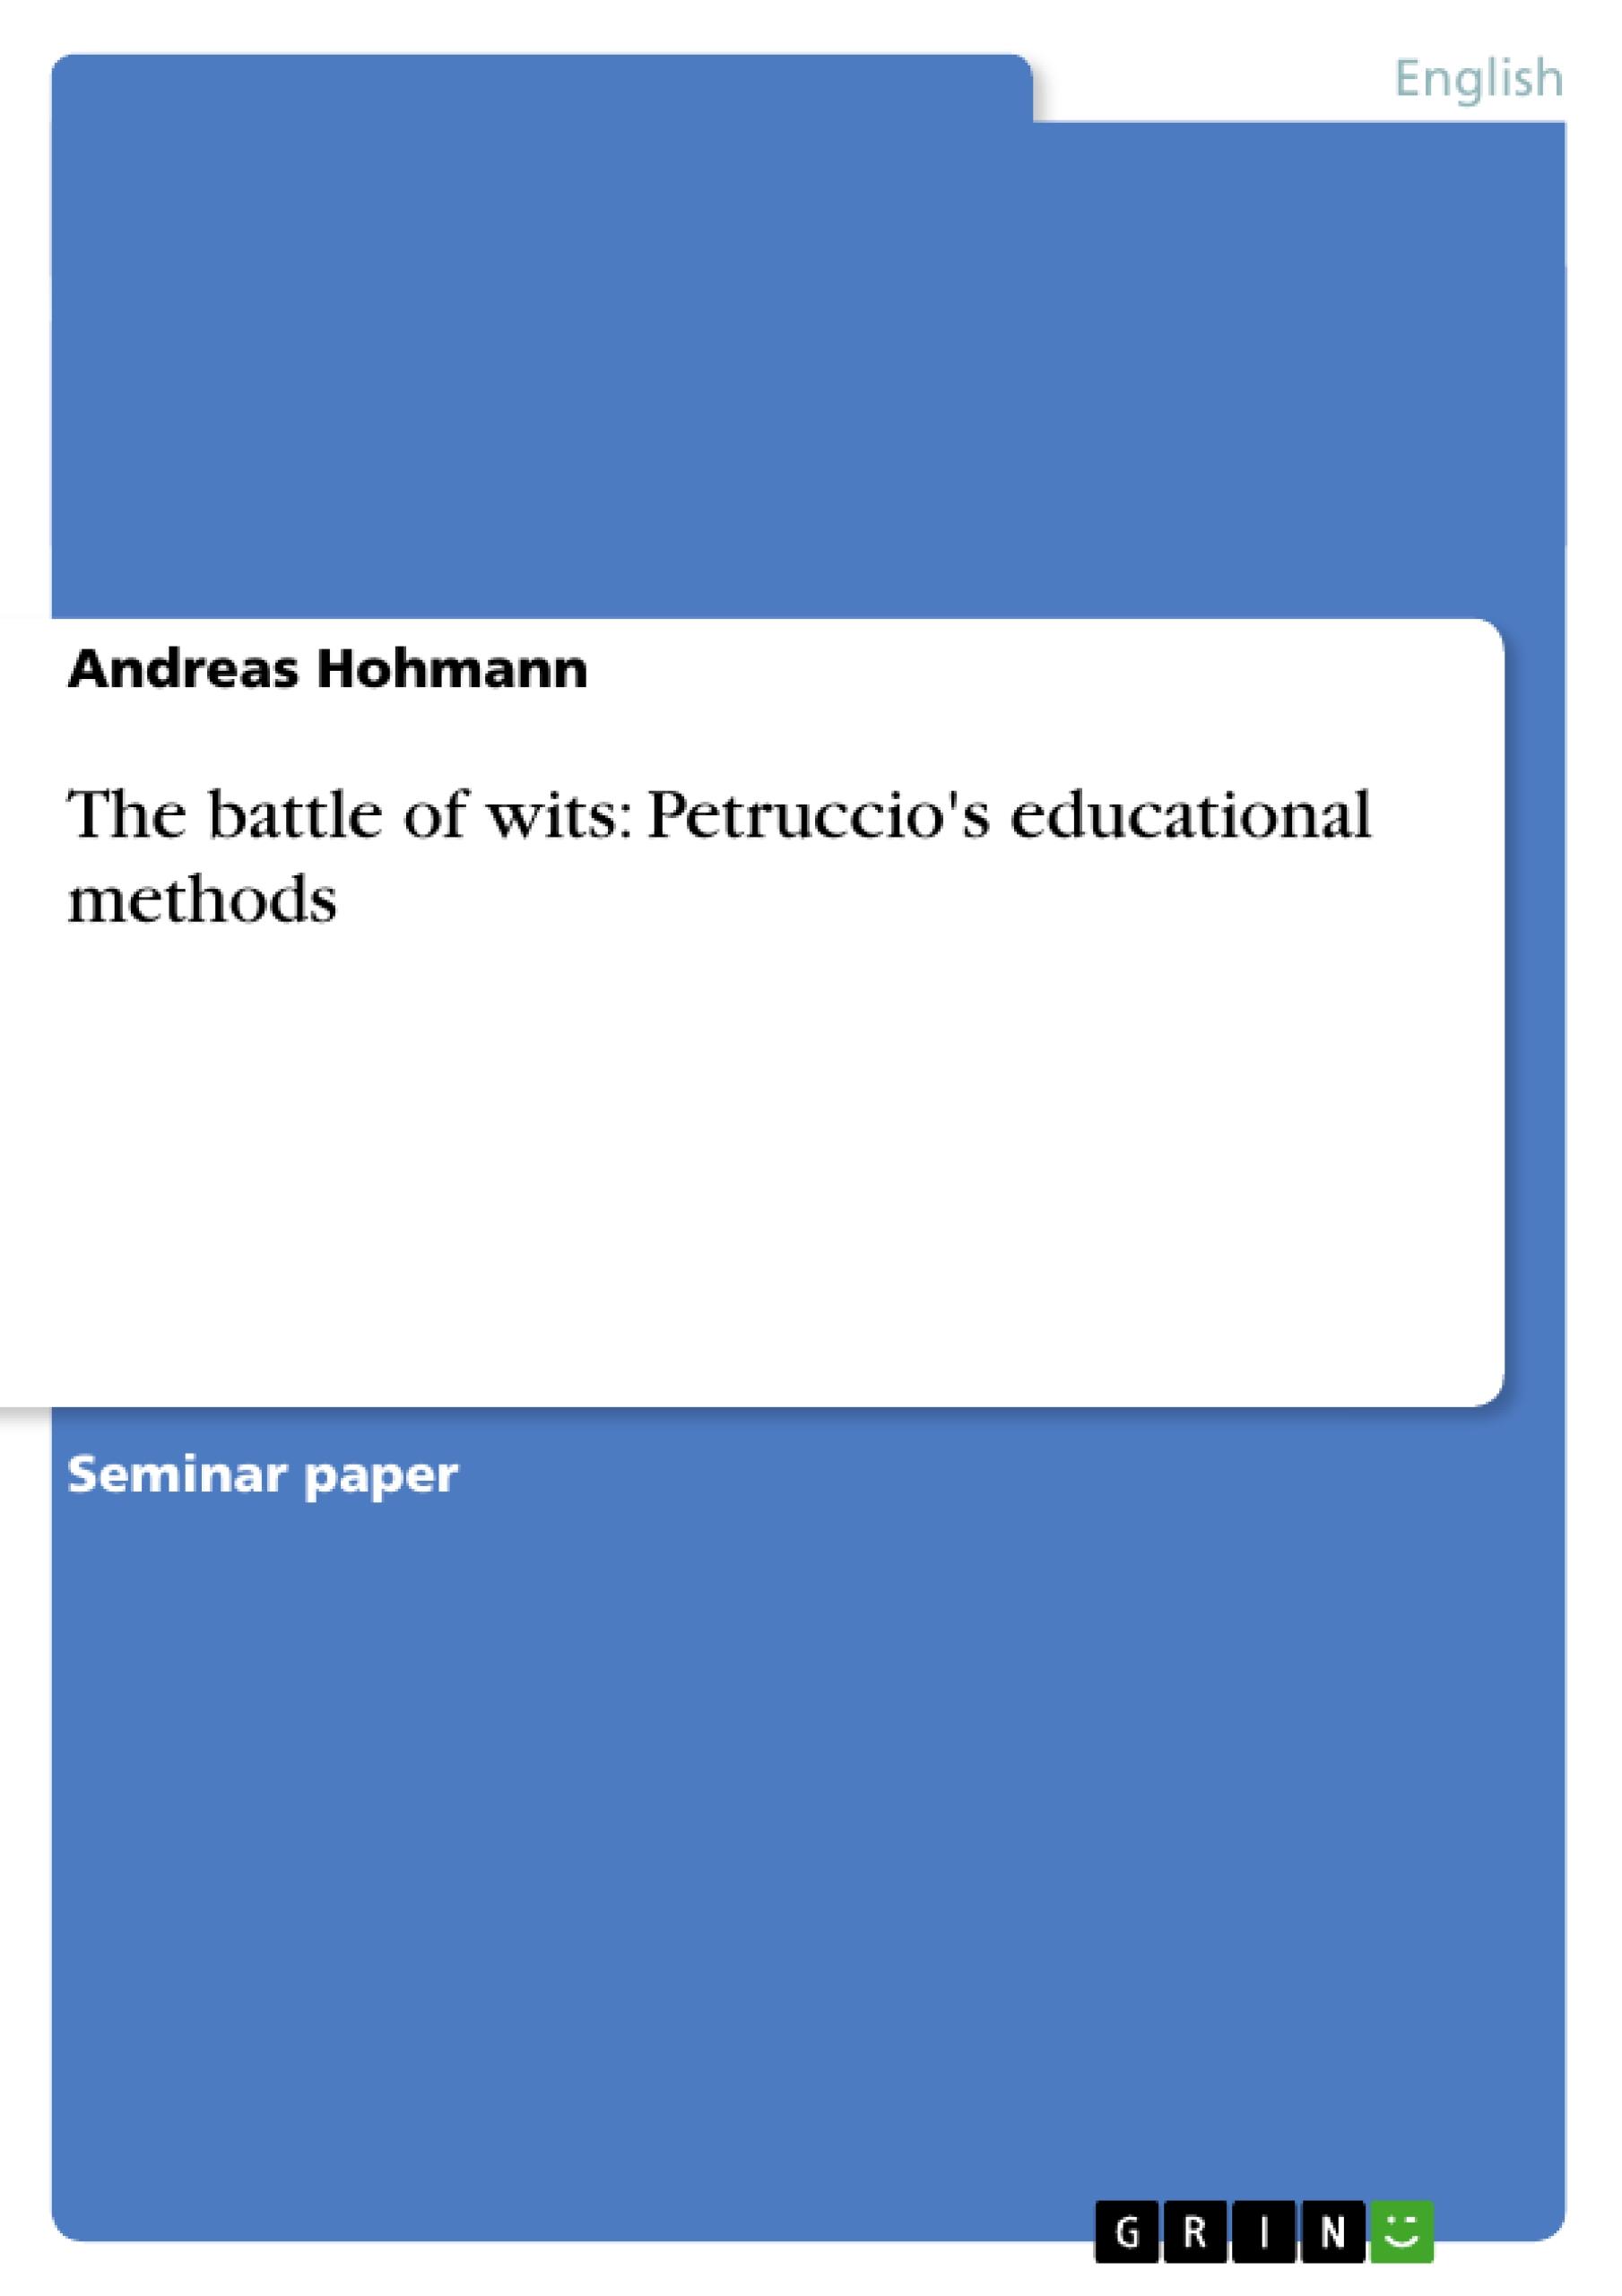 The battle of wits: Petruccio s educational methods - Hohmann, Andreas